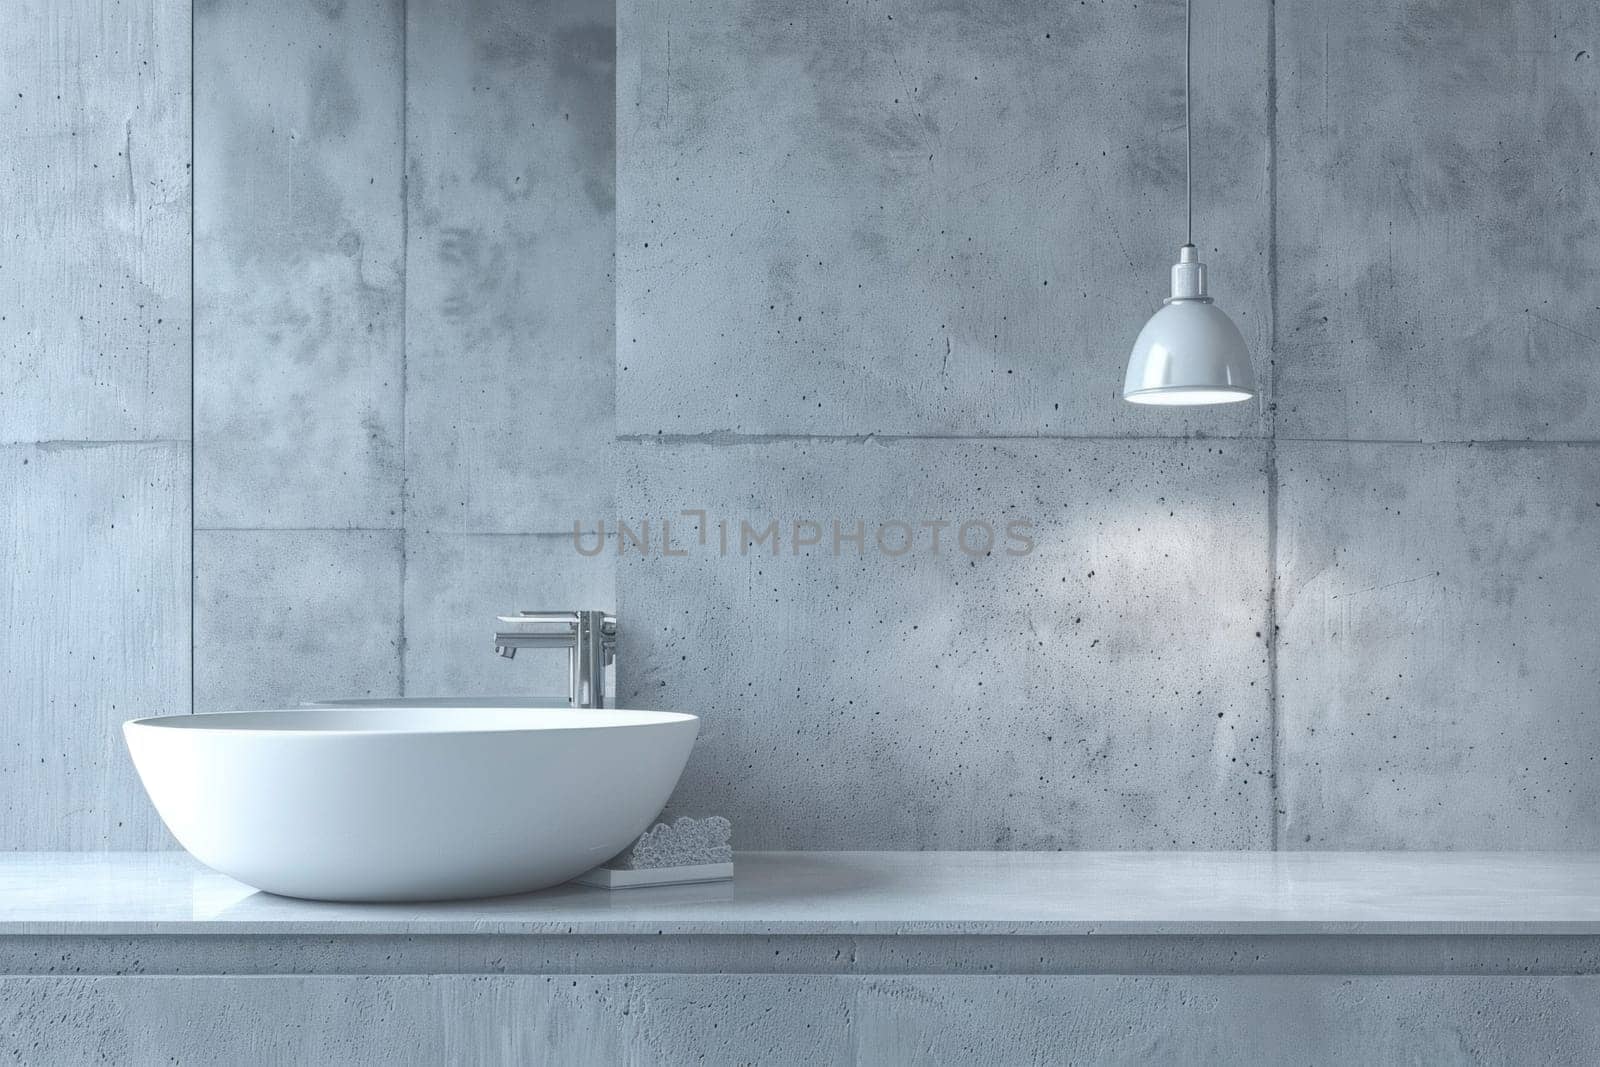 Modern bathroom design with white sink, hanging light, and concrete wall in minimalist style for interior decor and home improvement